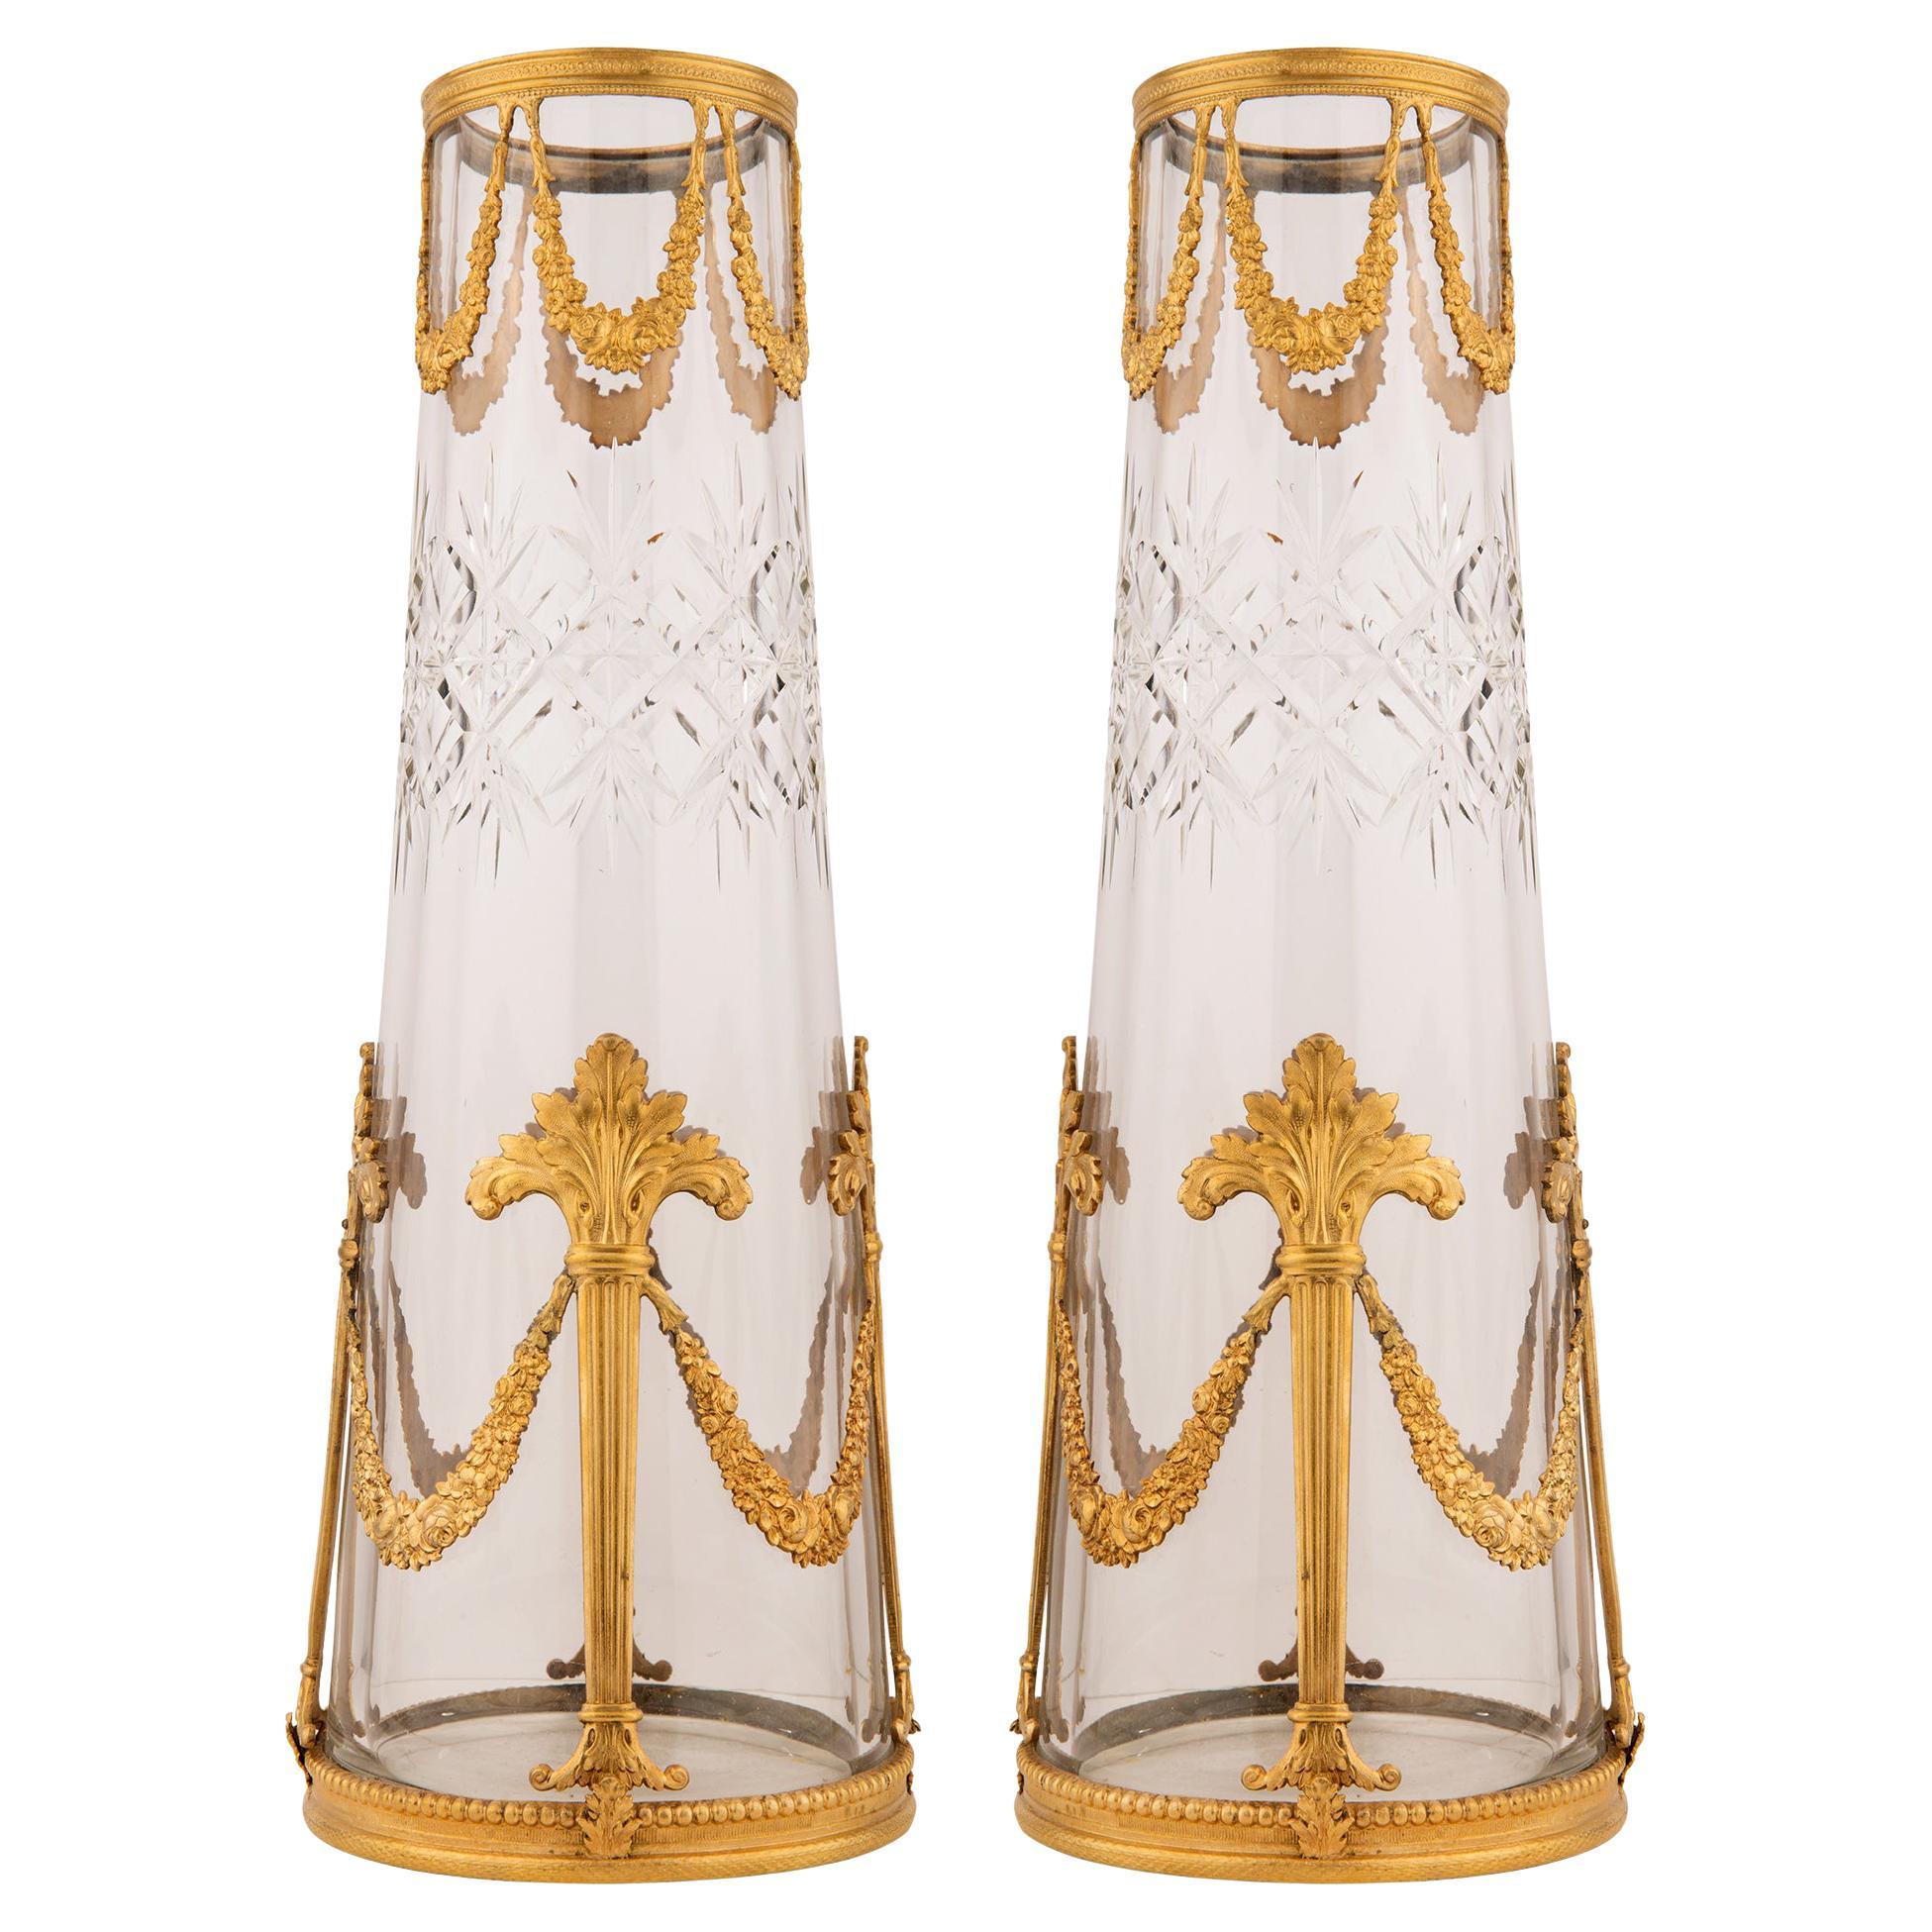 Pair of French 19th Century Louis XVI Style Crystal and Ormolu Vases